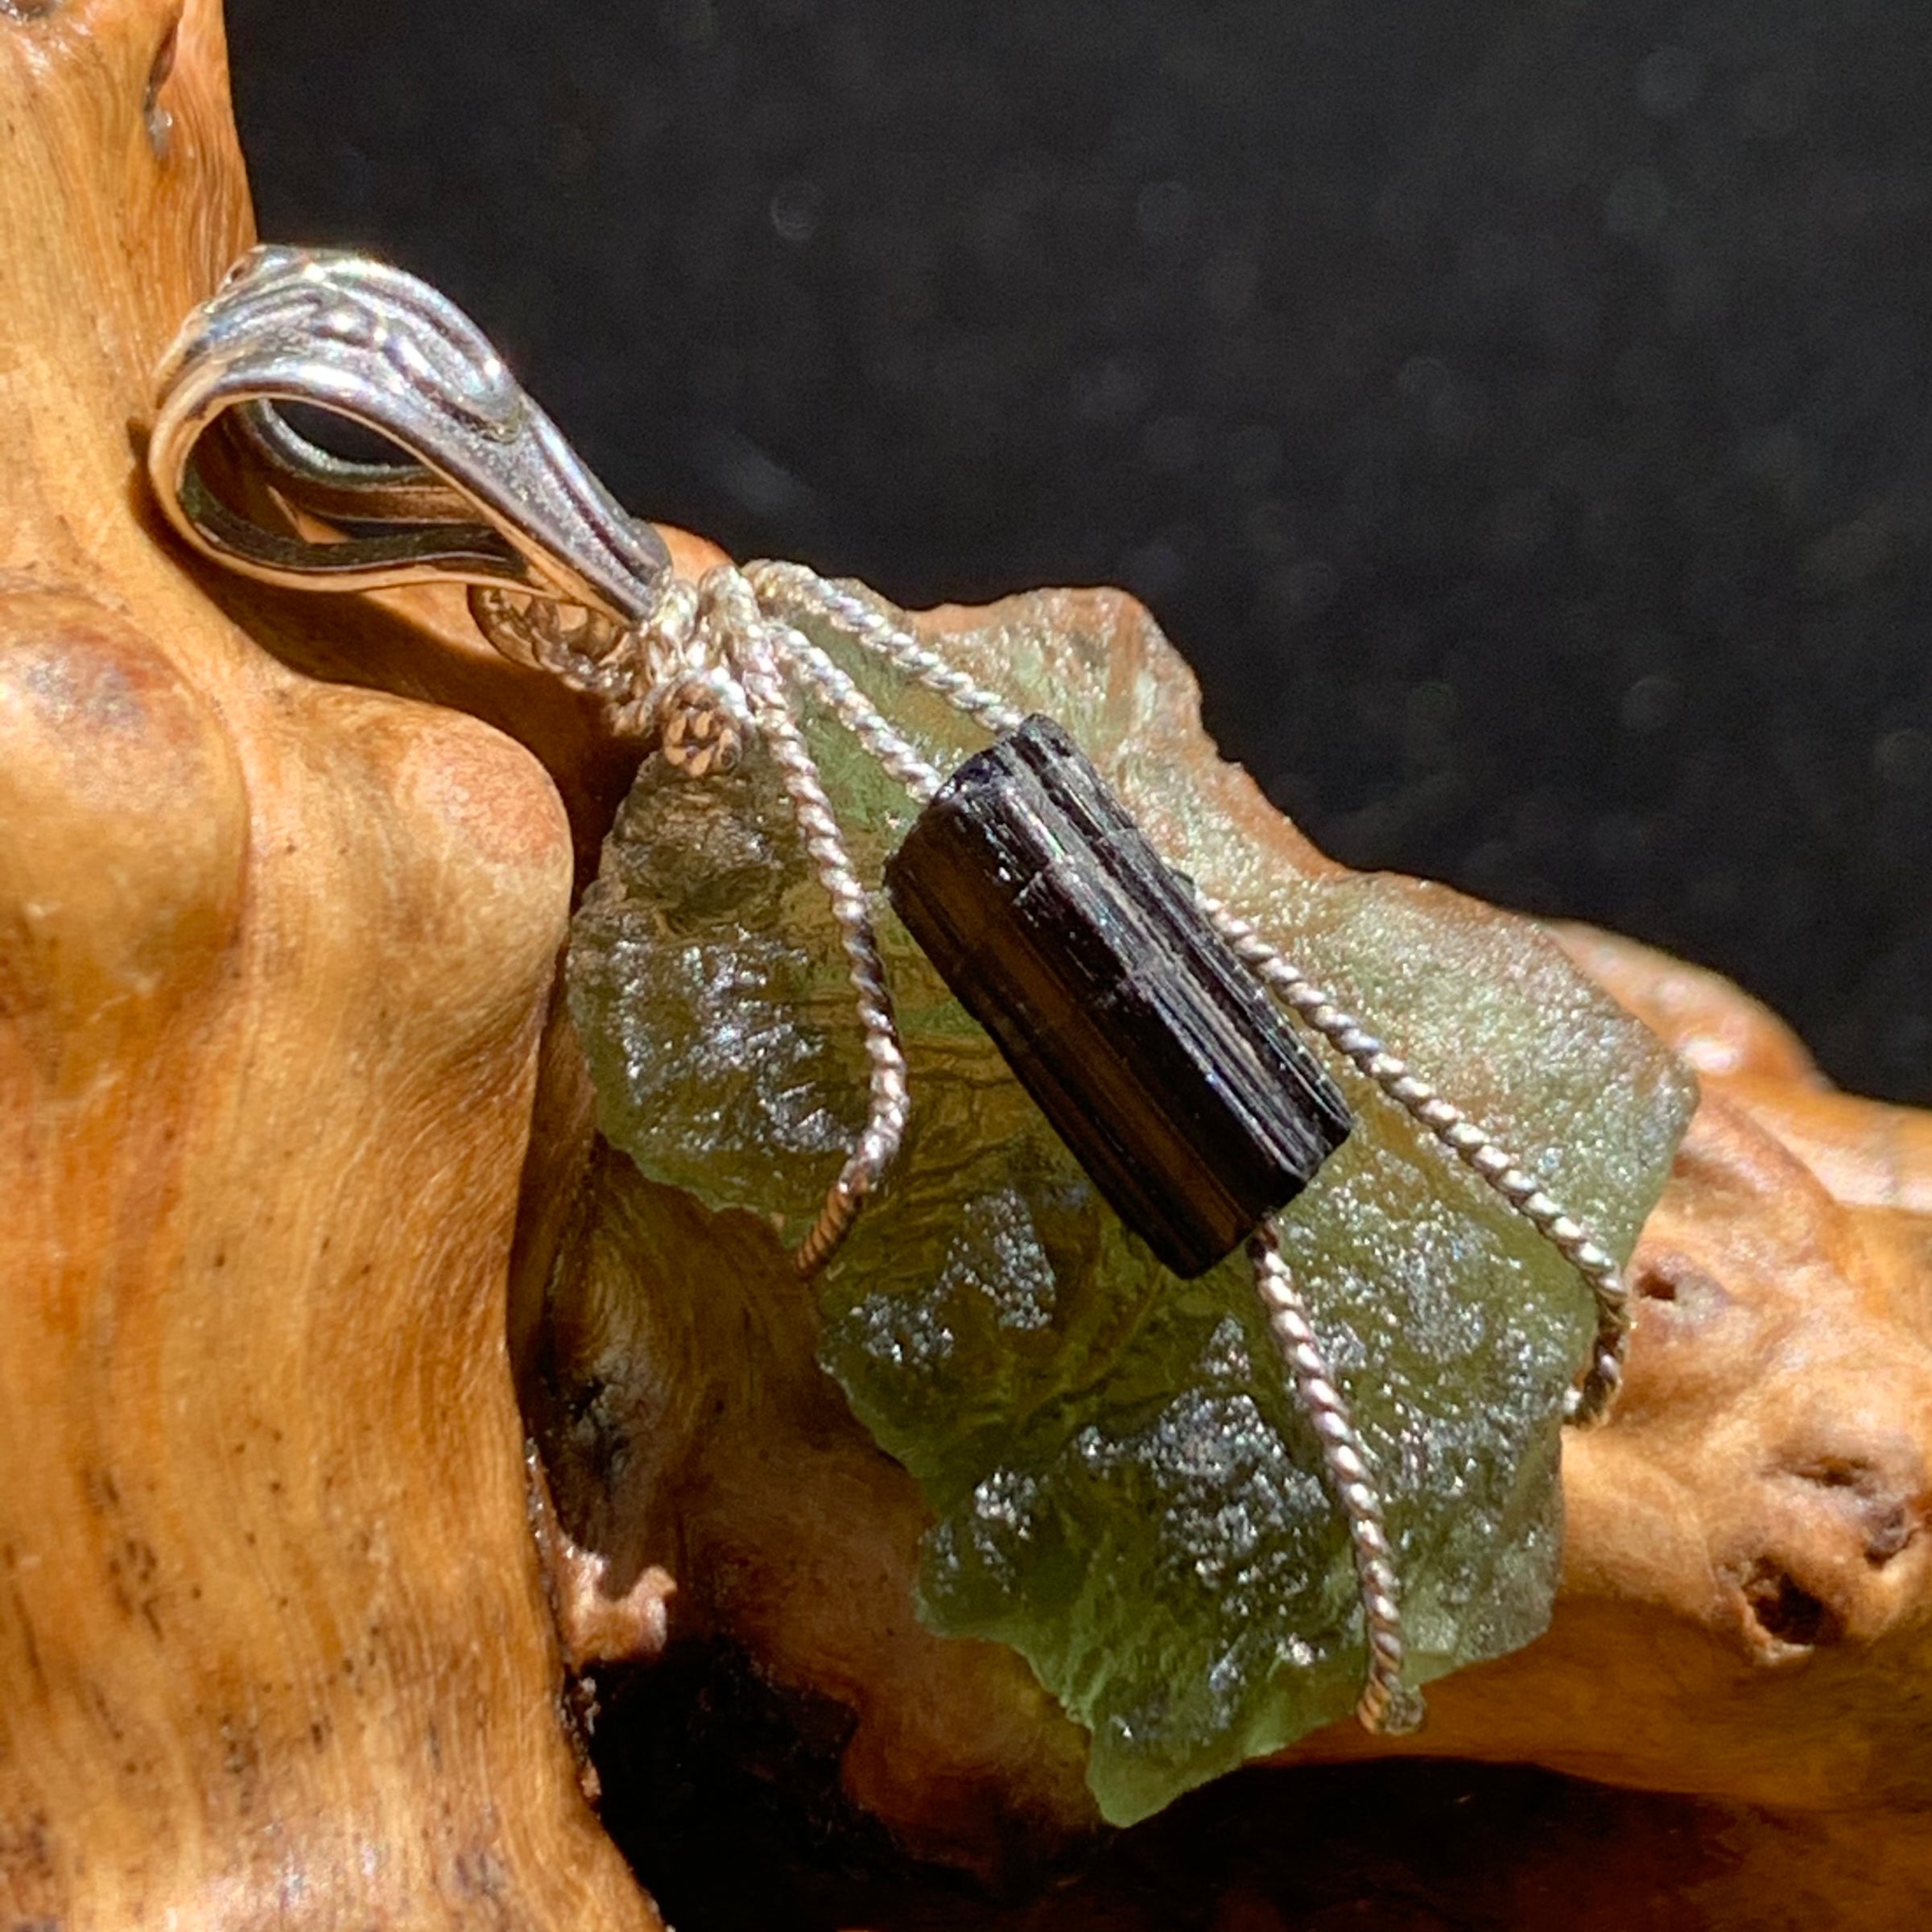 raw moldavite tektite and black tourmaline sterling silver wire wrapped pendant sitting on driftwood for display